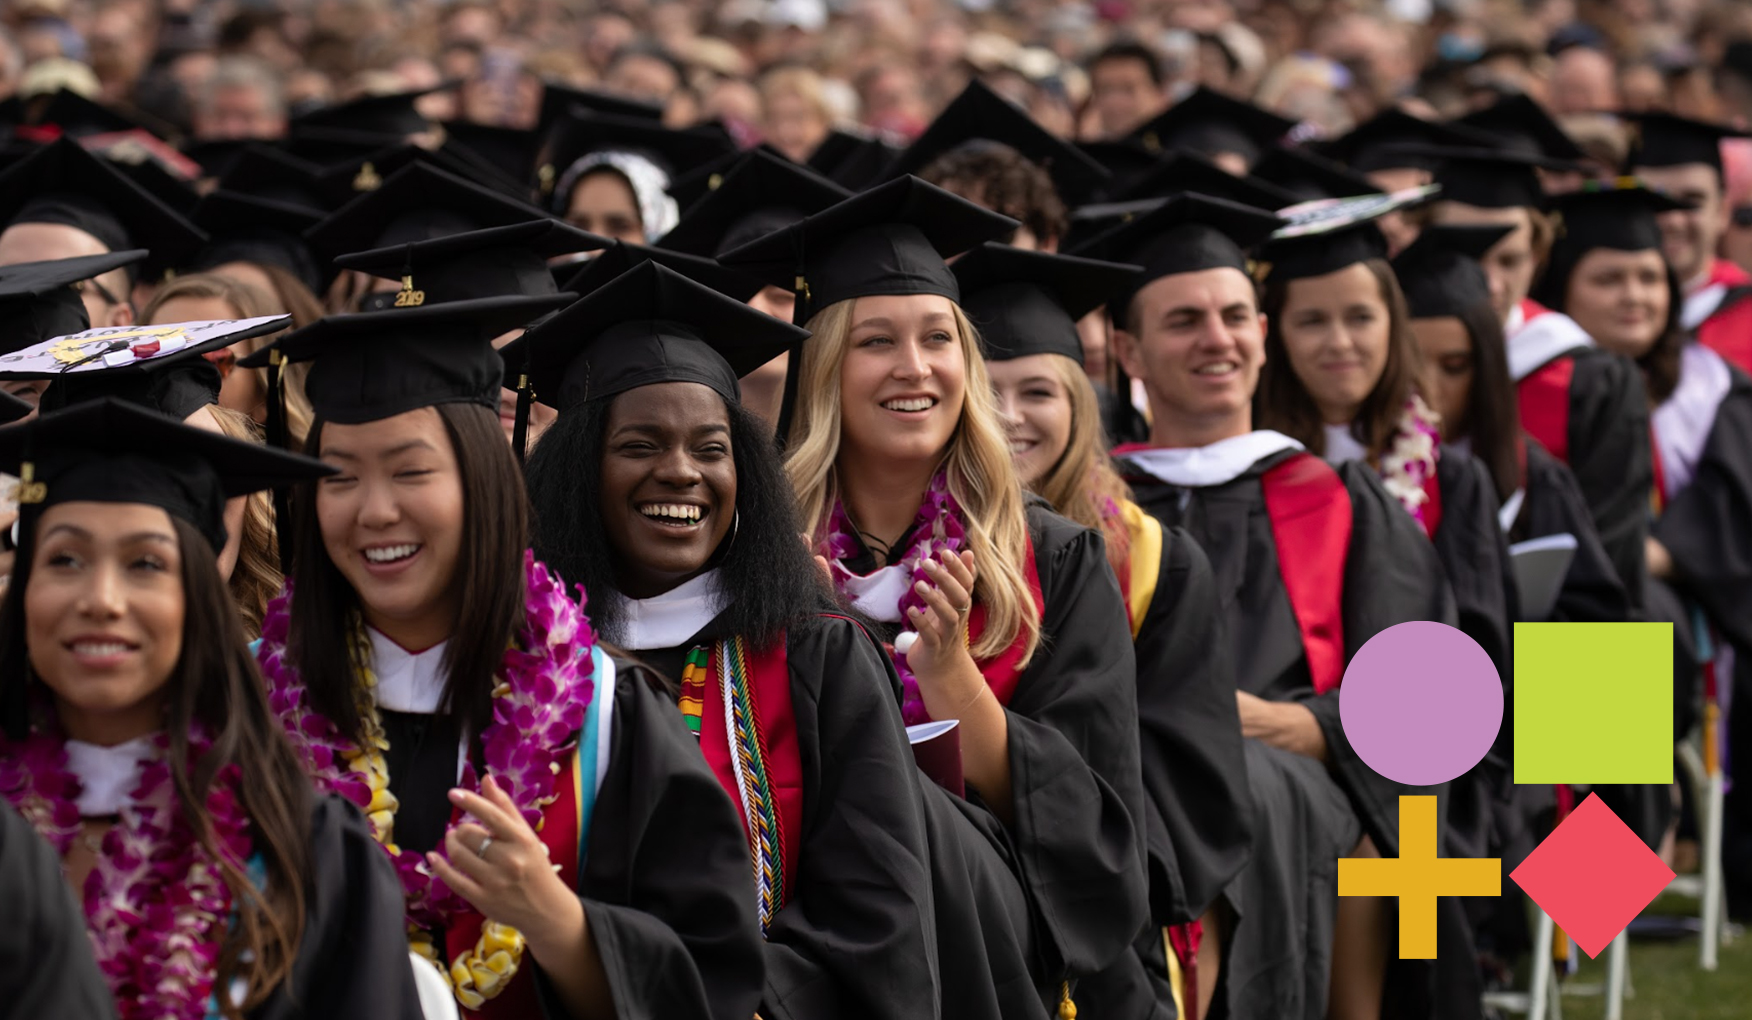 Graduates in caps and gowns with leis and stoles cheer at a commencement, signifying a celebration of diverse academic achievements.